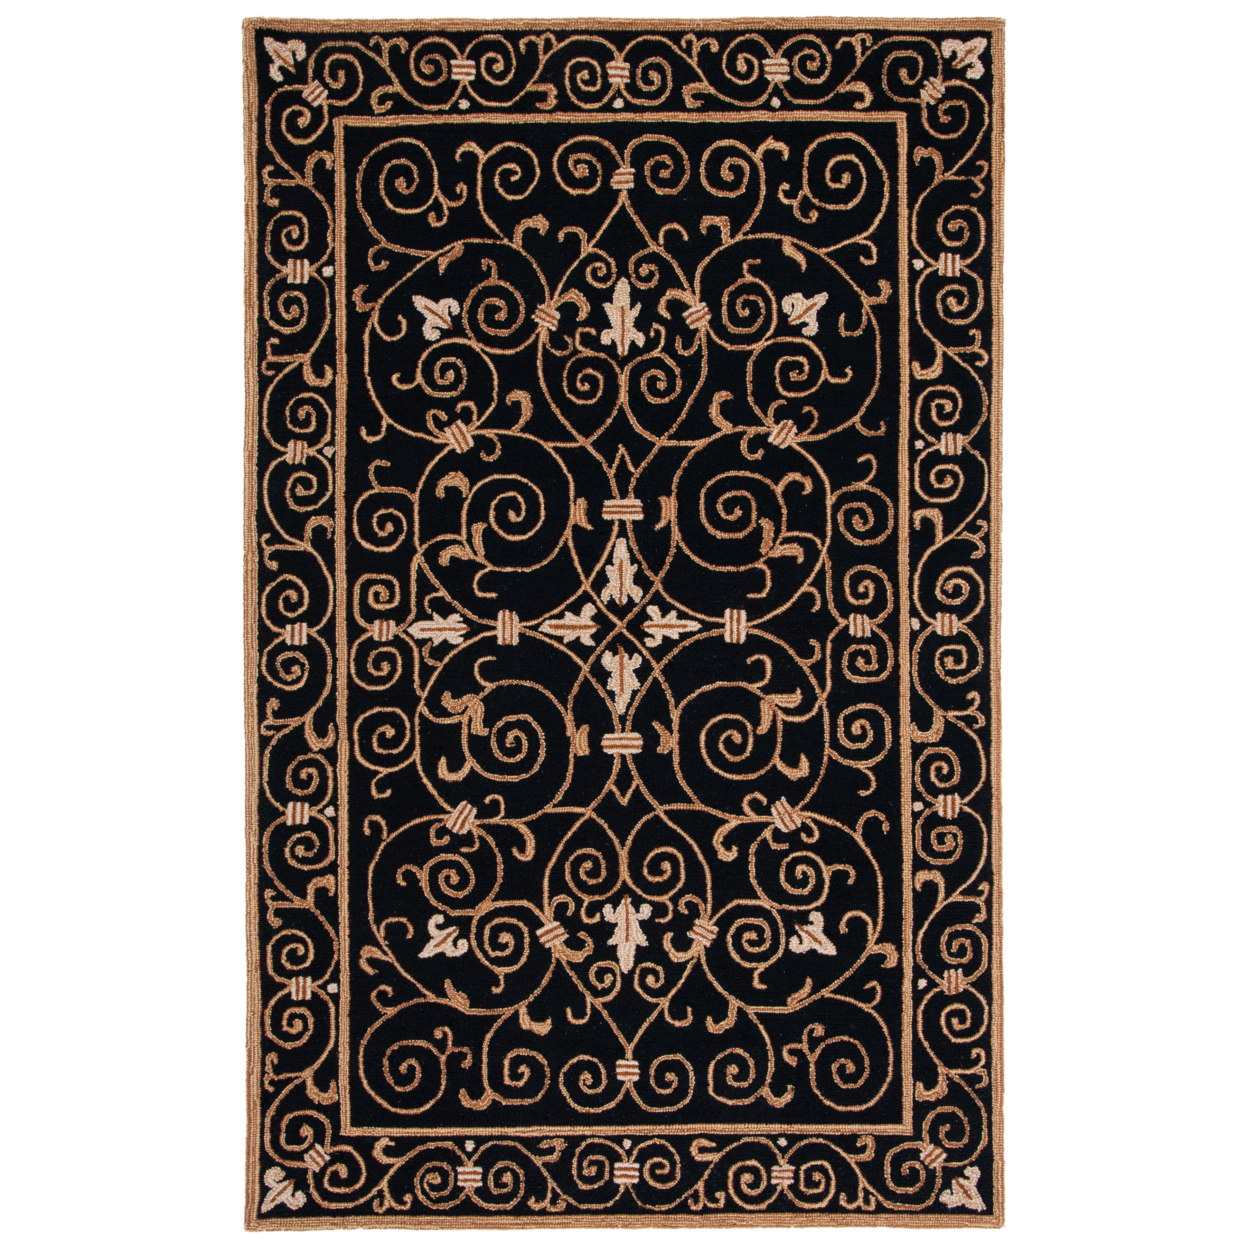 SAFAVIEH Chelsea Collection HK11A Hand-hooked Black Rug - 4' 6 X 6' 6 Oval